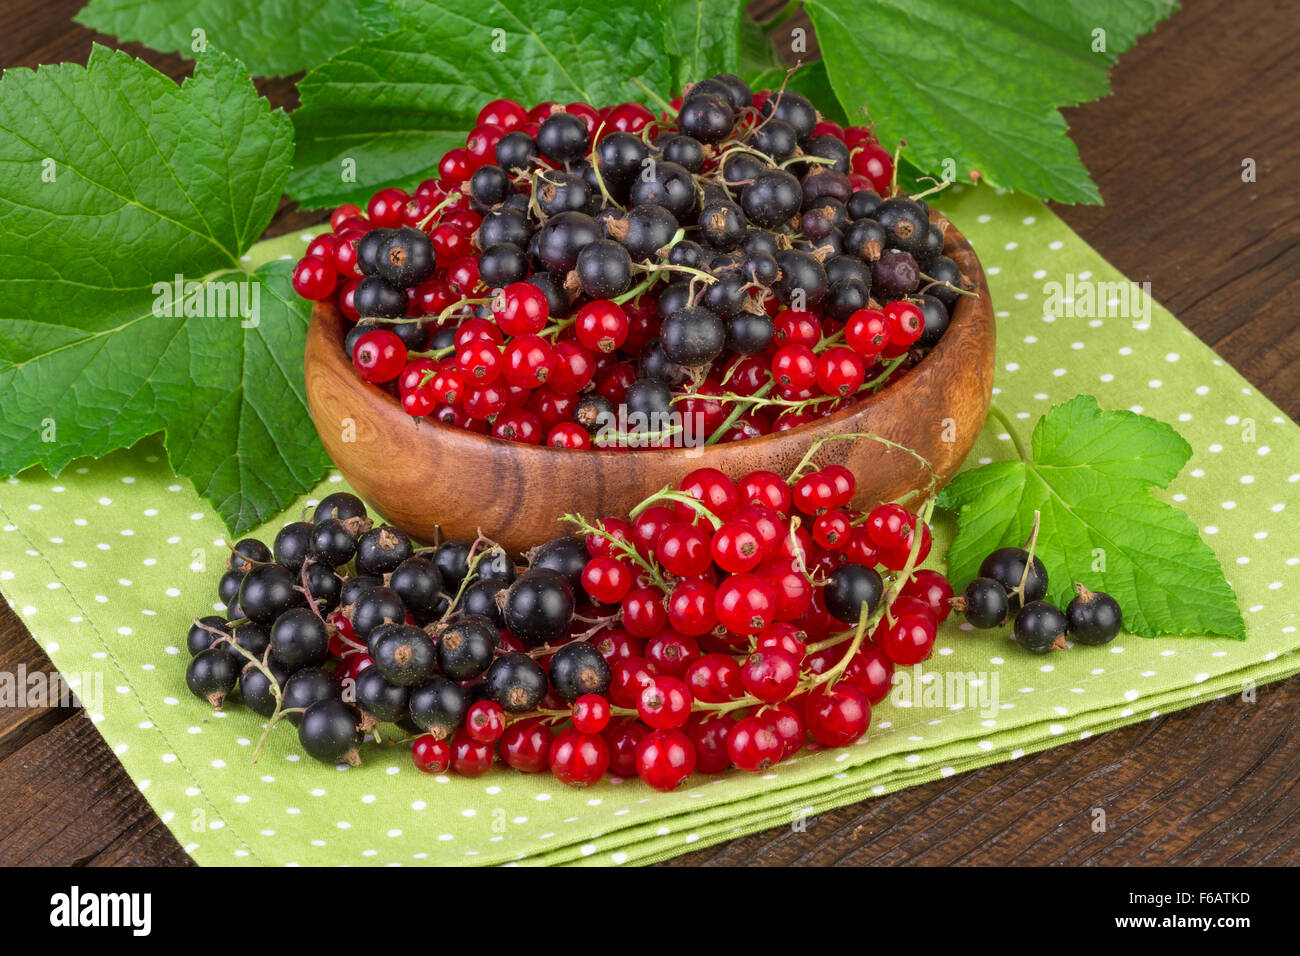 red and black currant berries in wooden bowl Stock Photo